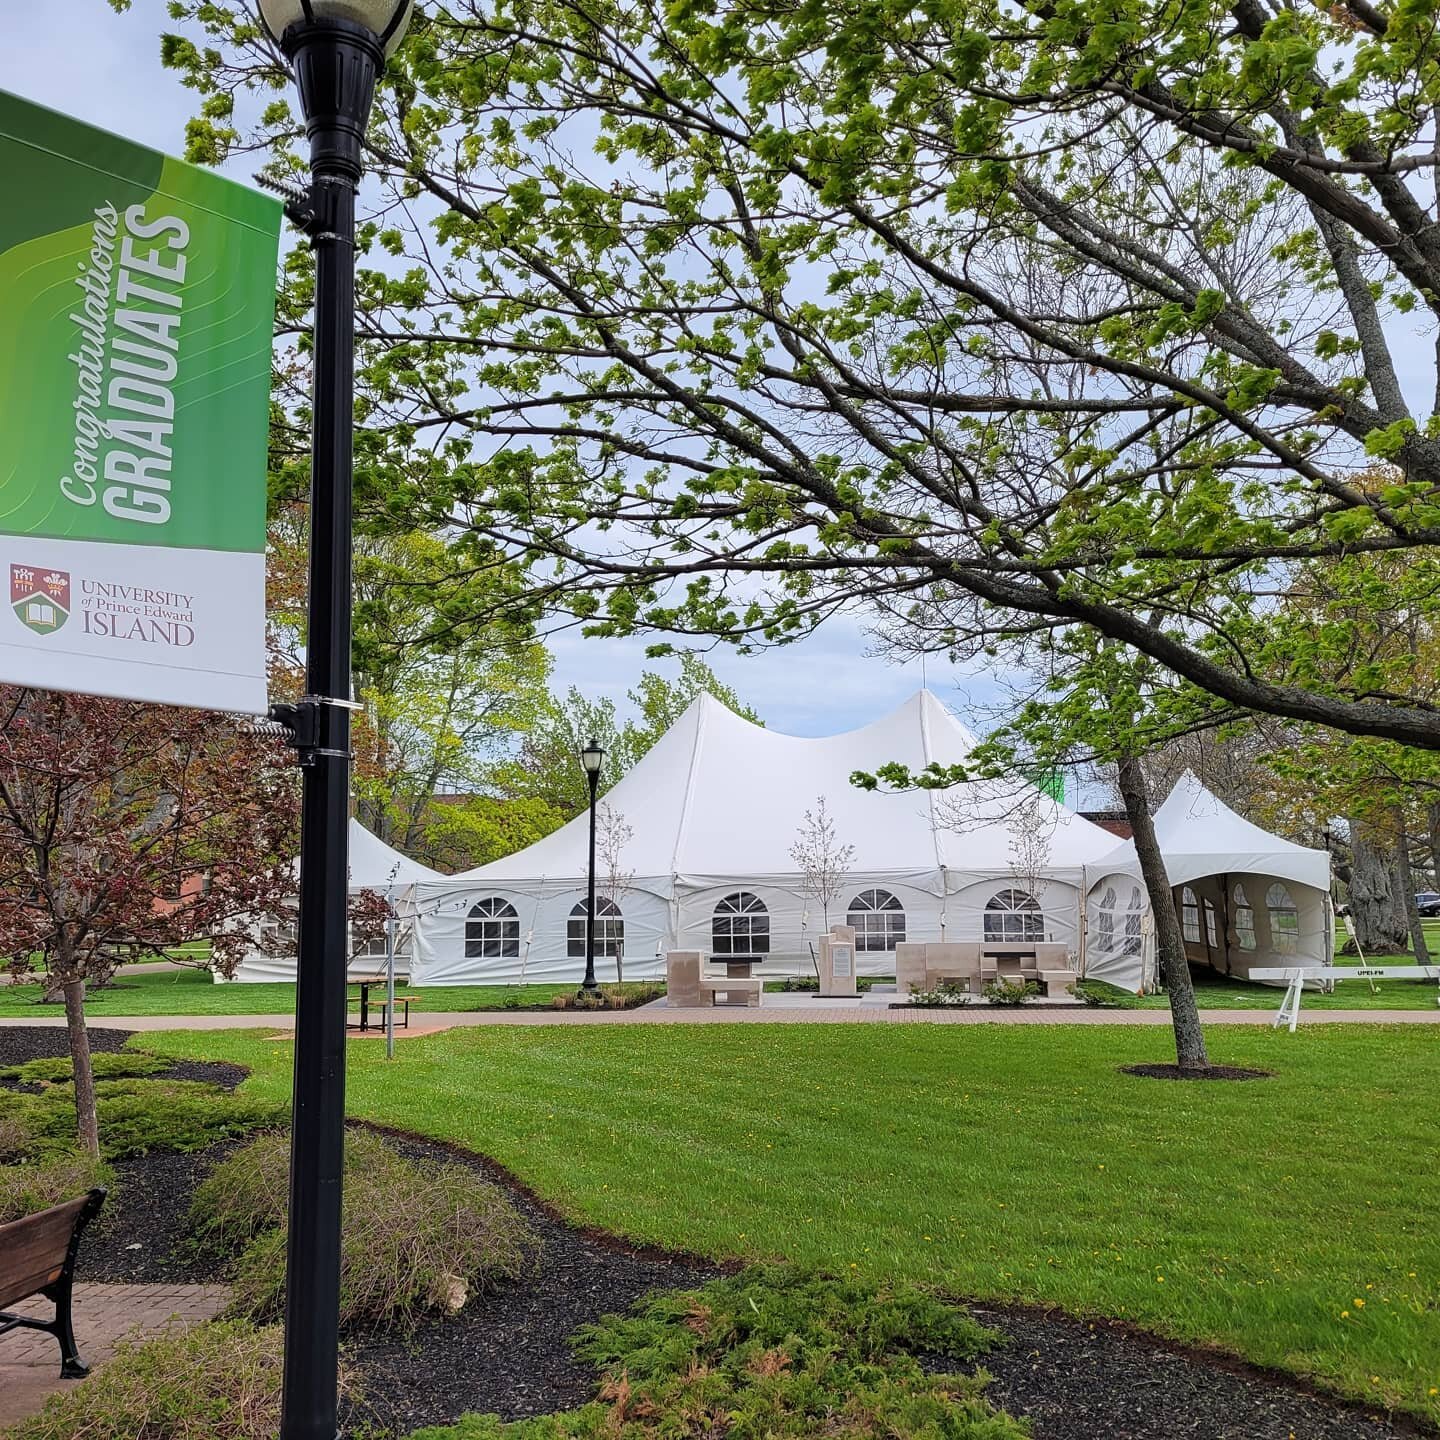 Congratulations to all of the recent graduates of @upei 

We were happy to create a space on campus that allows for a safe gathering

#gradclass2021 #graduation #upei #upeisu #tentrental